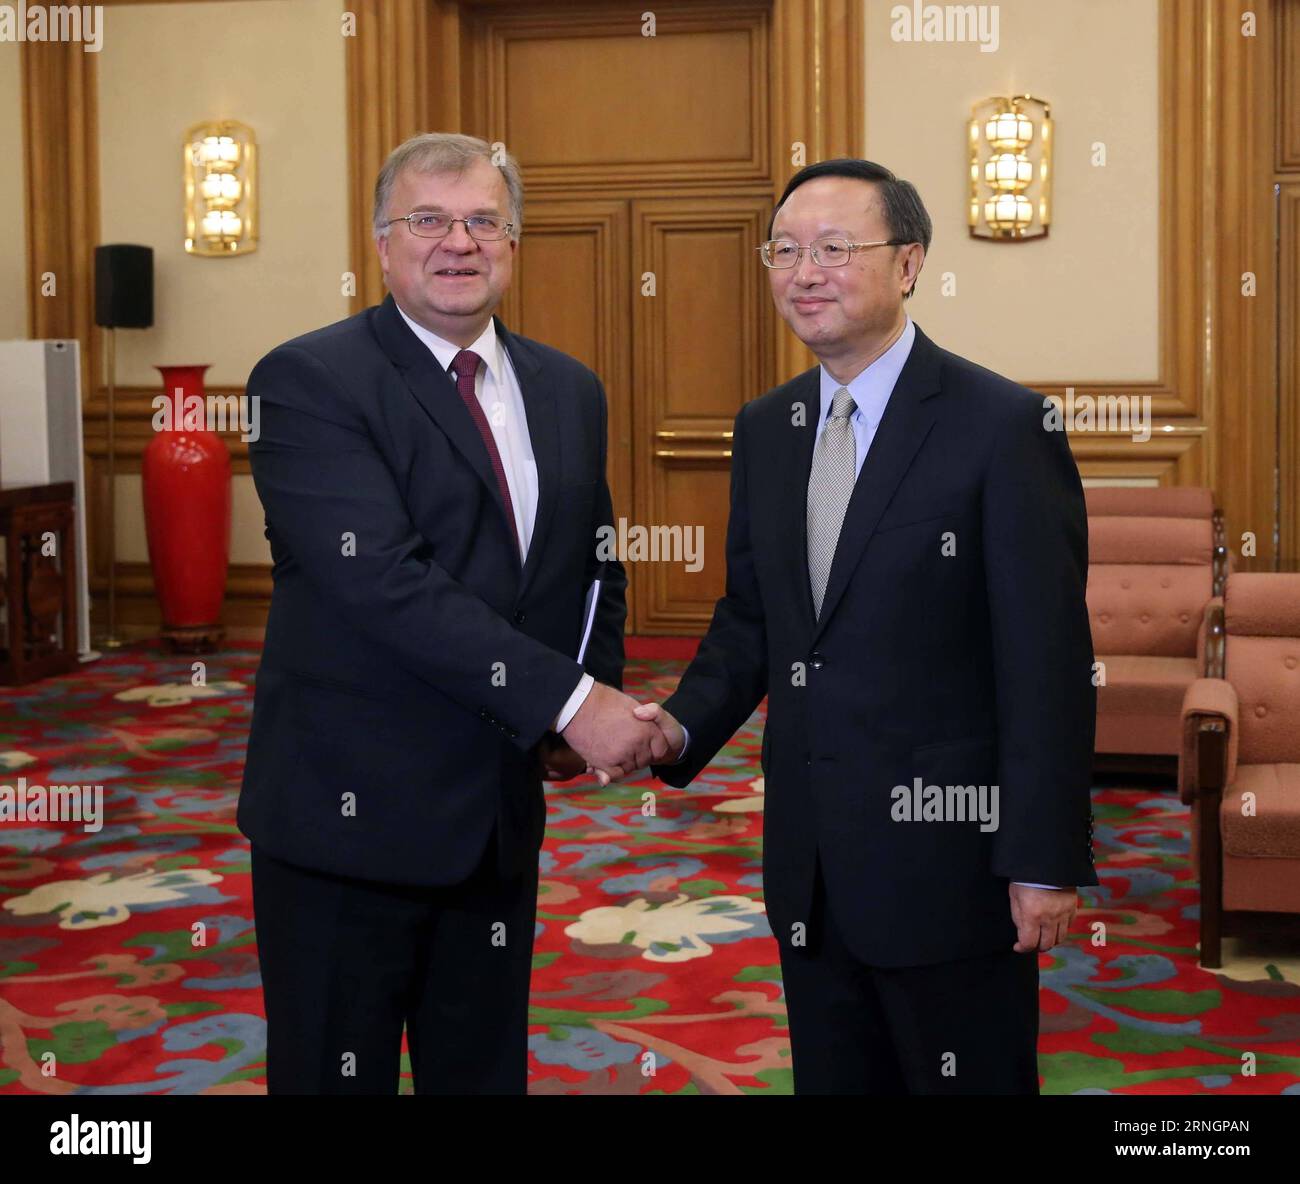 (161009) -- BEIJING, Oct. 9, 2016 -- Chinese State Councilor Yang Jiechi (R) meets with his Lithuanian counterpart Alminas Maciulis in Beijing, capital of China, Oct. 9, 2016. )(mcg) CHINA-LITHUANIA-YANG JIECHI-MEETING (CN) LiuxWeibing PUBLICATIONxNOTxINxCHN   Beijing OCT 9 2016 Chinese State Councilors Yang Jiechi r Meets With His Lithuanian Part  Maciulis in Beijing Capital of China OCT 9 2016 McG China Lithuania Yang Jiechi Meeting CN LiuxWeibing PUBLICATIONxNOTxINxCHN Stock Photo